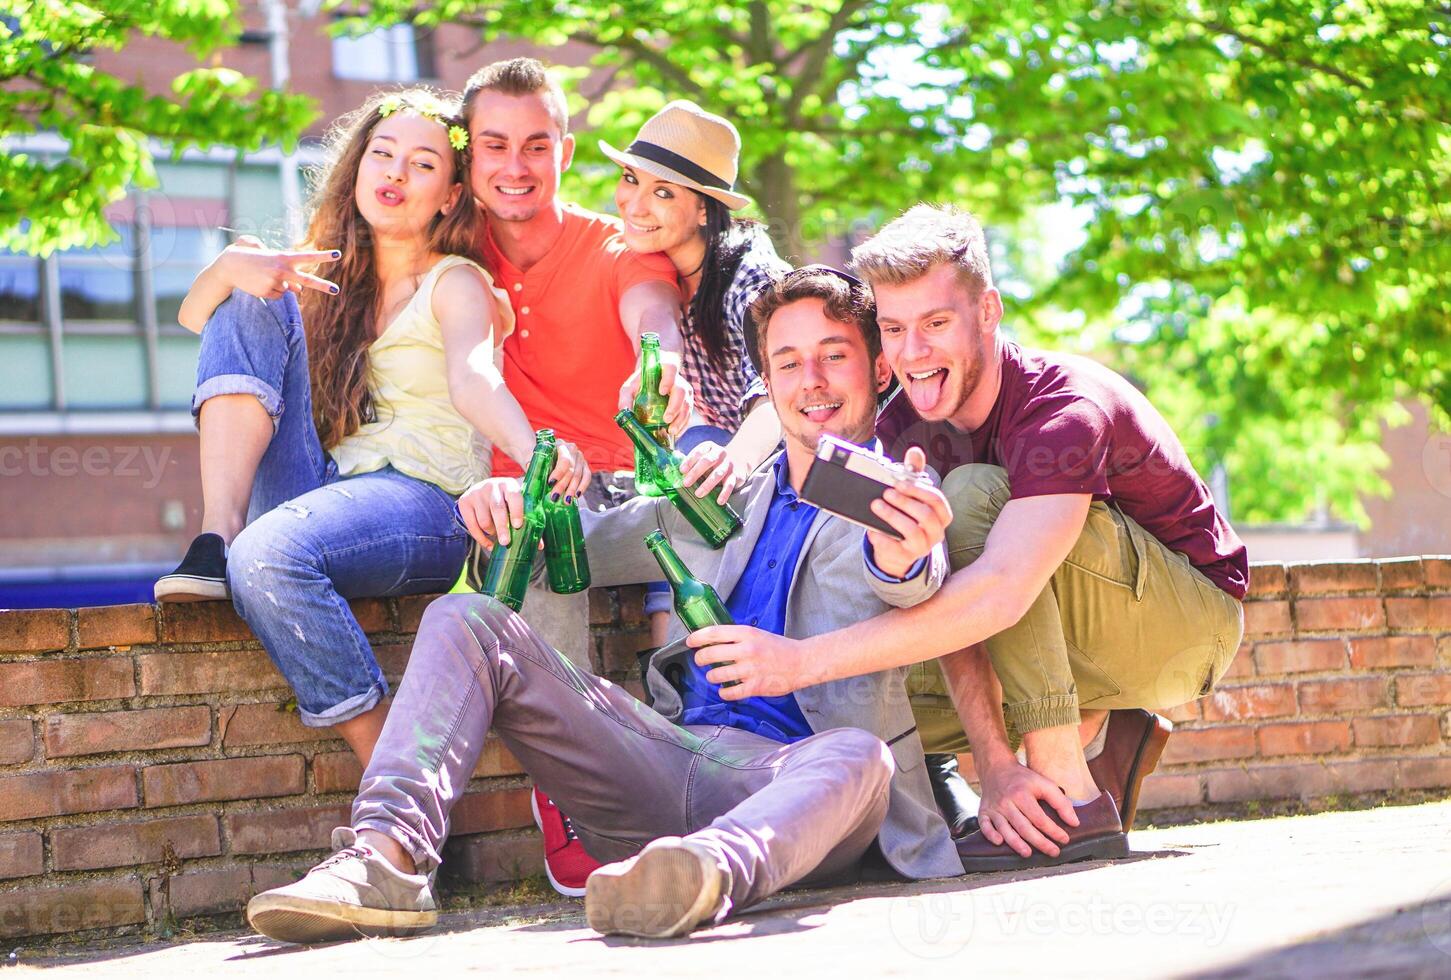 Group of happy friends drinking beers and taking selfie with a vintage camera outdoor - Young people making photos while toasting and cheering bottles of beer in the city - Friendship, youth concept